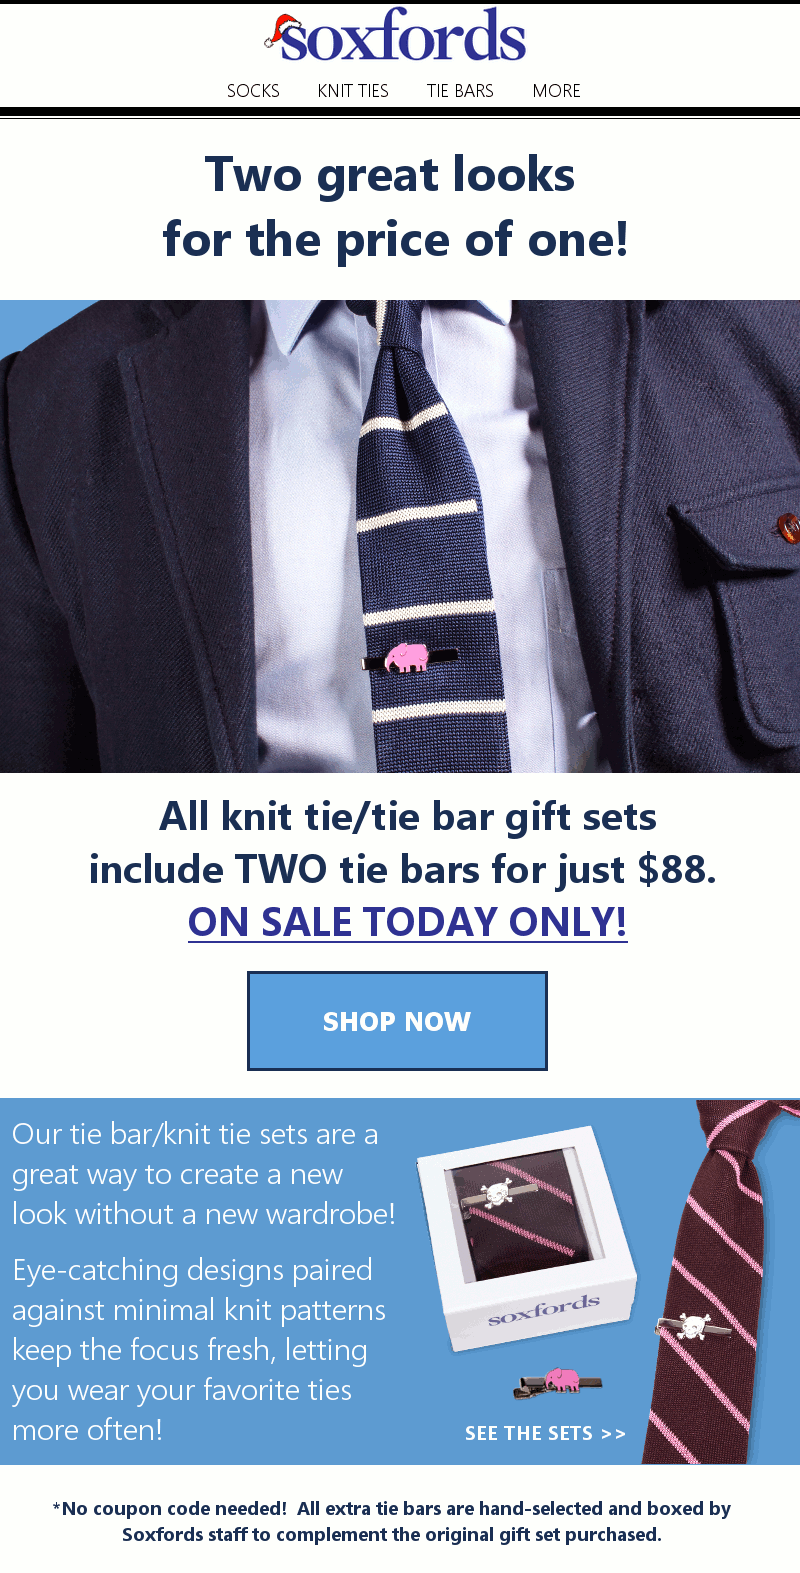 Soxfords Knit Tie + Tie Bar Gift Sets on Sale!